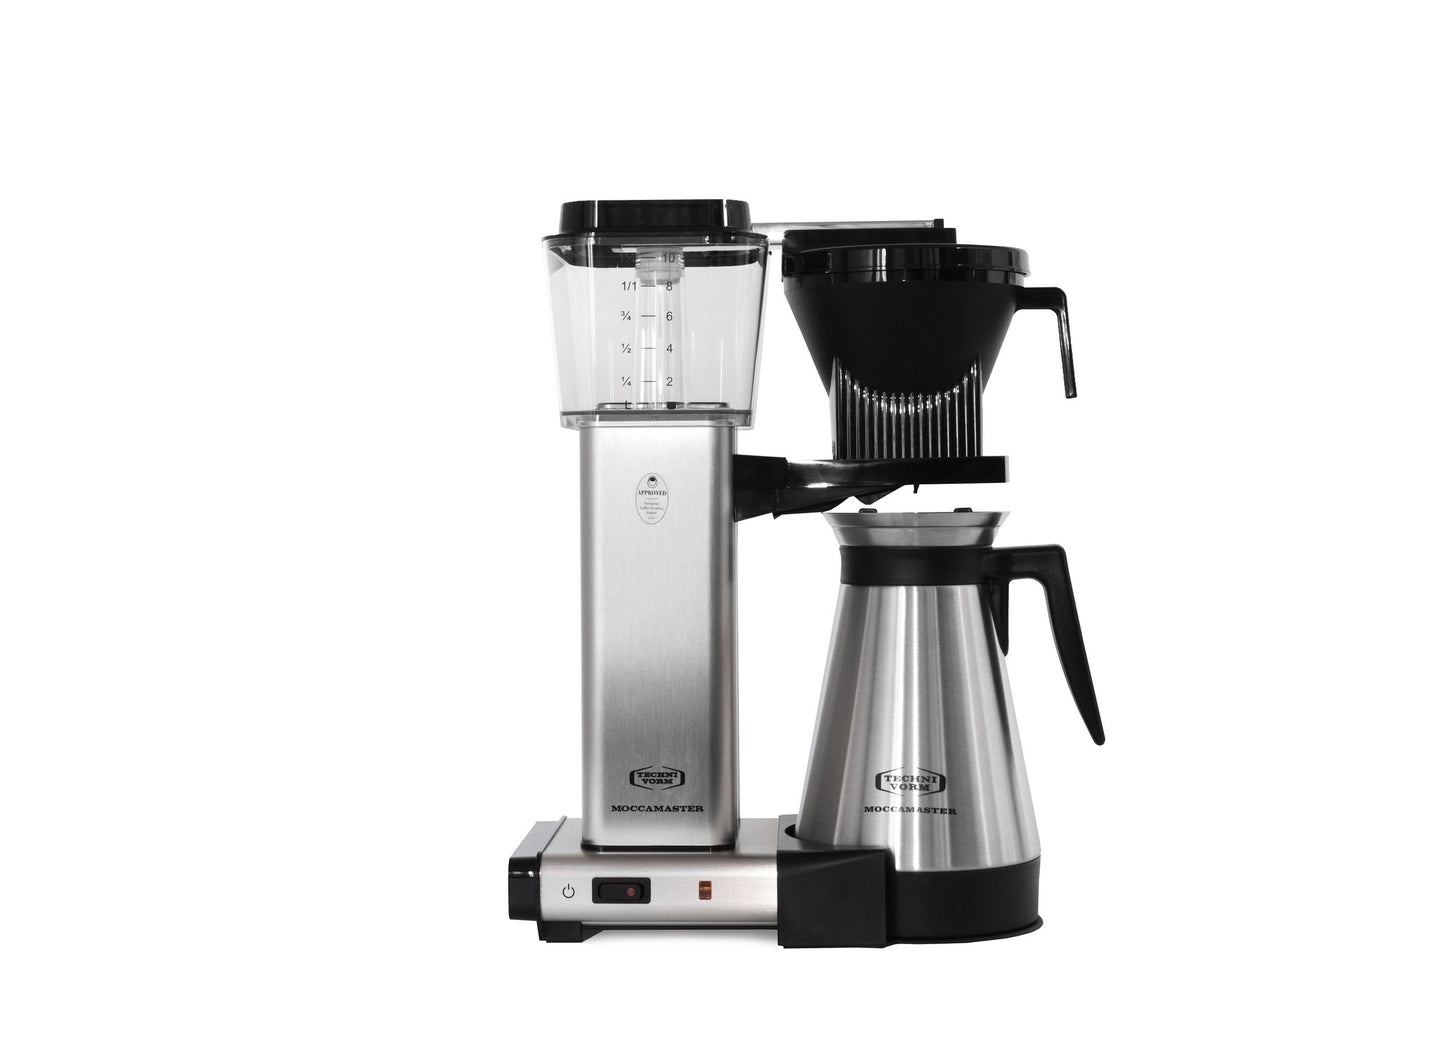 MOCCAMASTER KBGT Coffee Maker 1.25L with Insulated Thermos Flask - Polished Silver